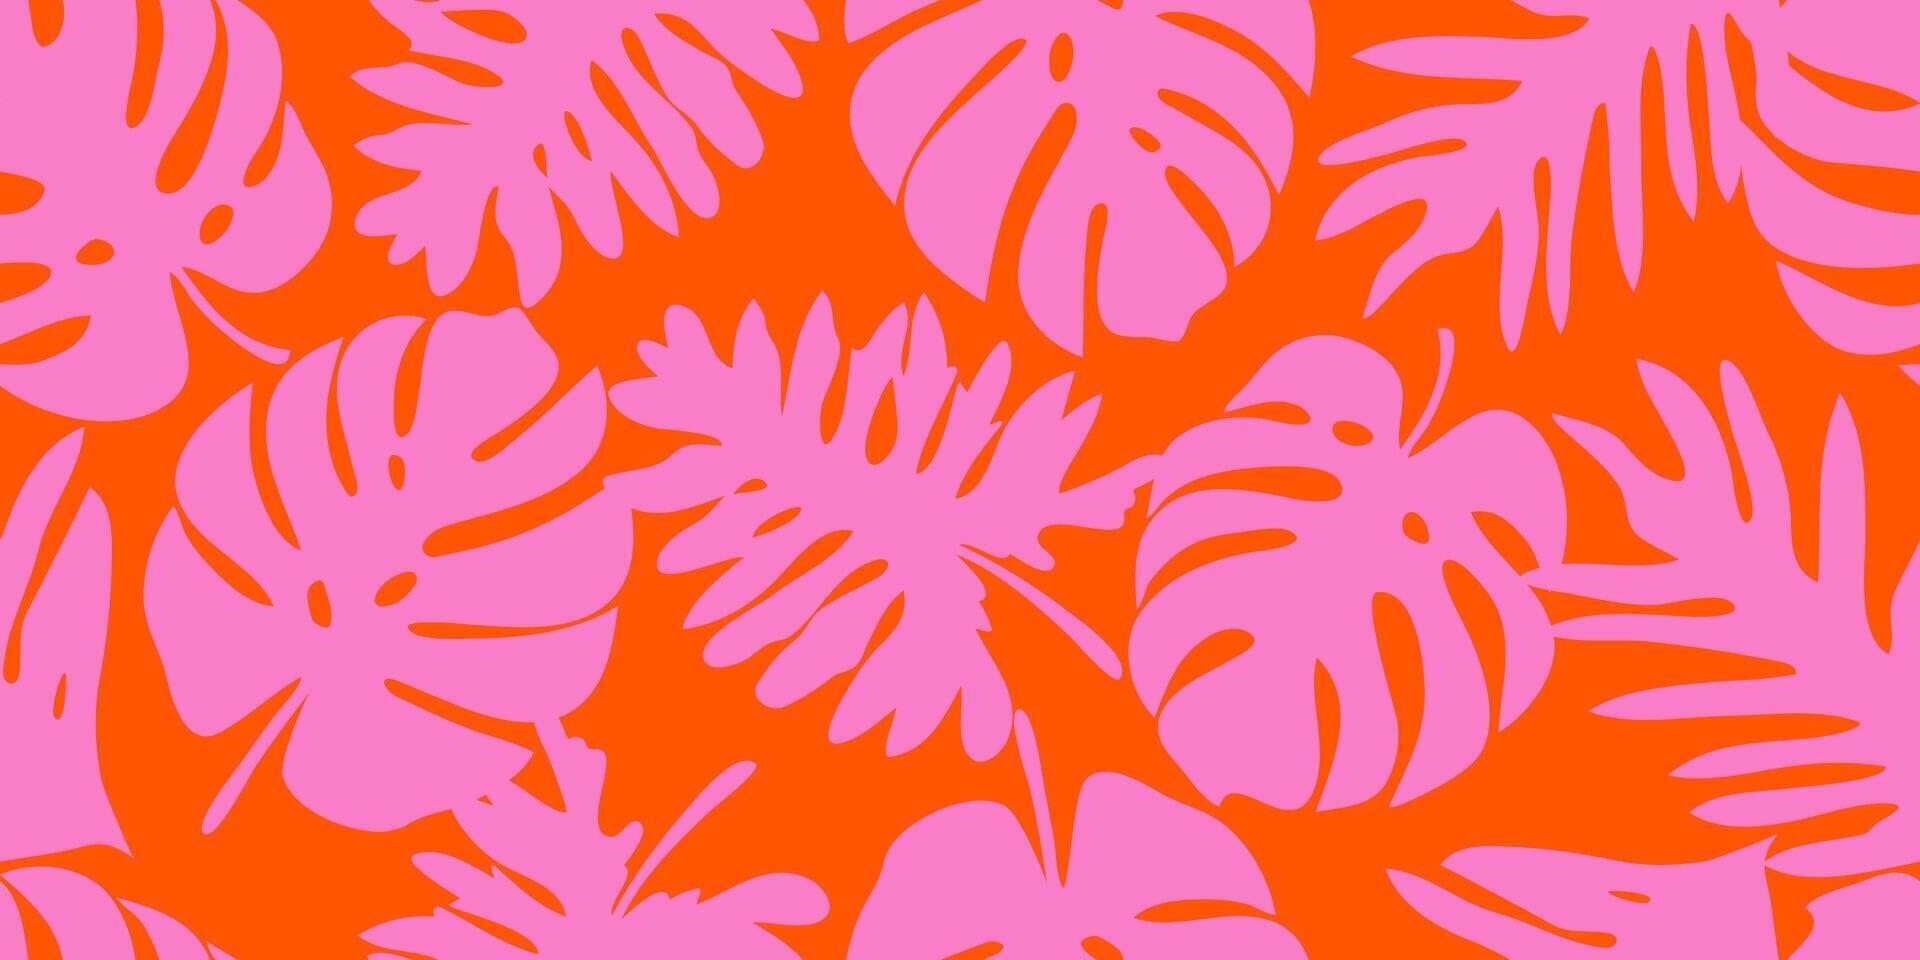 Monstera leaves seamless pattern, hand drawn tropical botanical, spring and Summer time, flat style, natural ornaments for textile, fabric, wallpaper, background. Vector illustration.